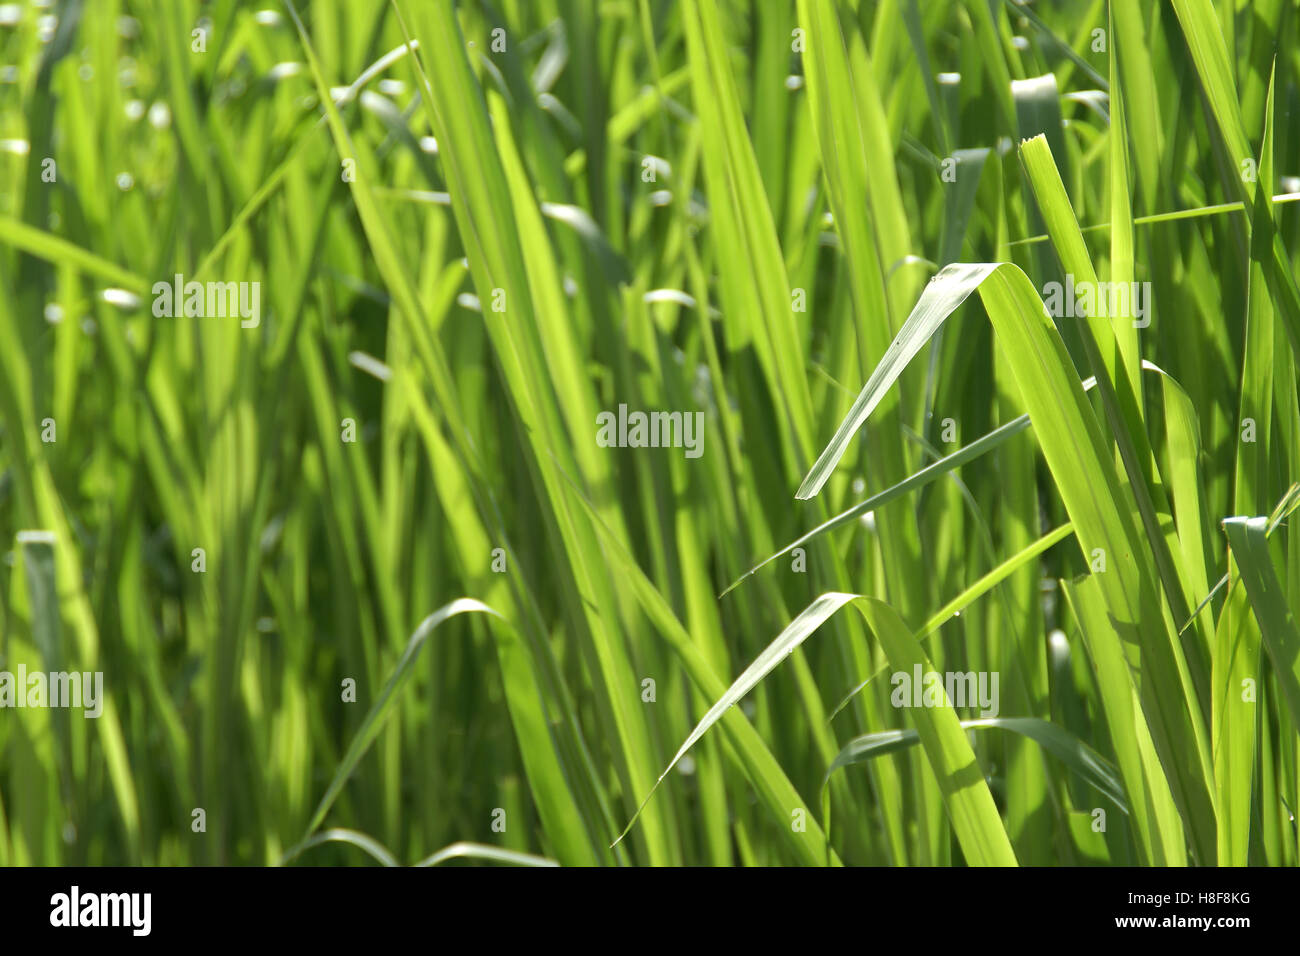 Lush Green Grass as Background Stock Photo